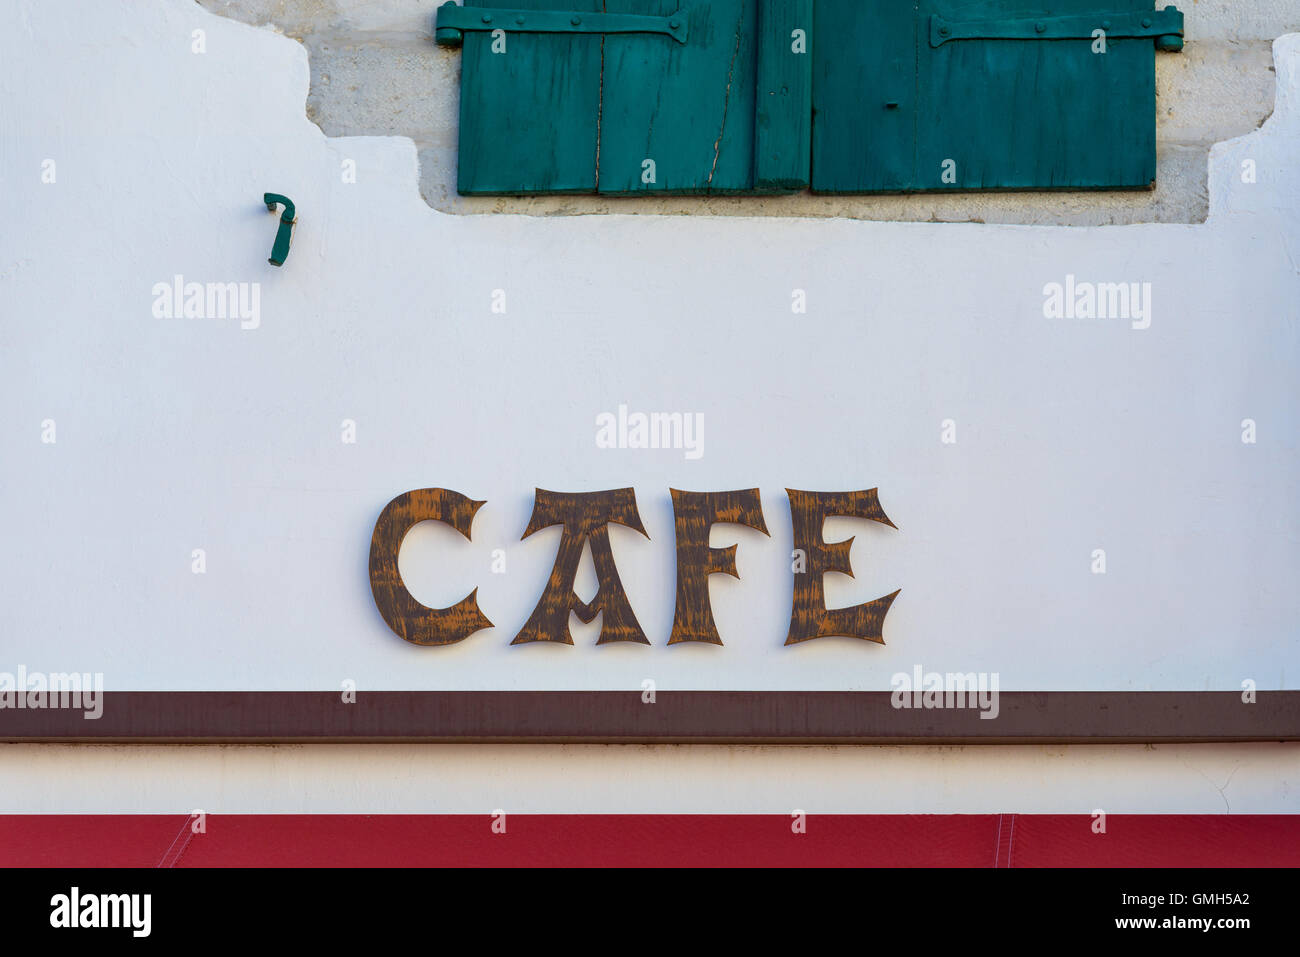 Cafe sign in the French Basque country Stock Photo